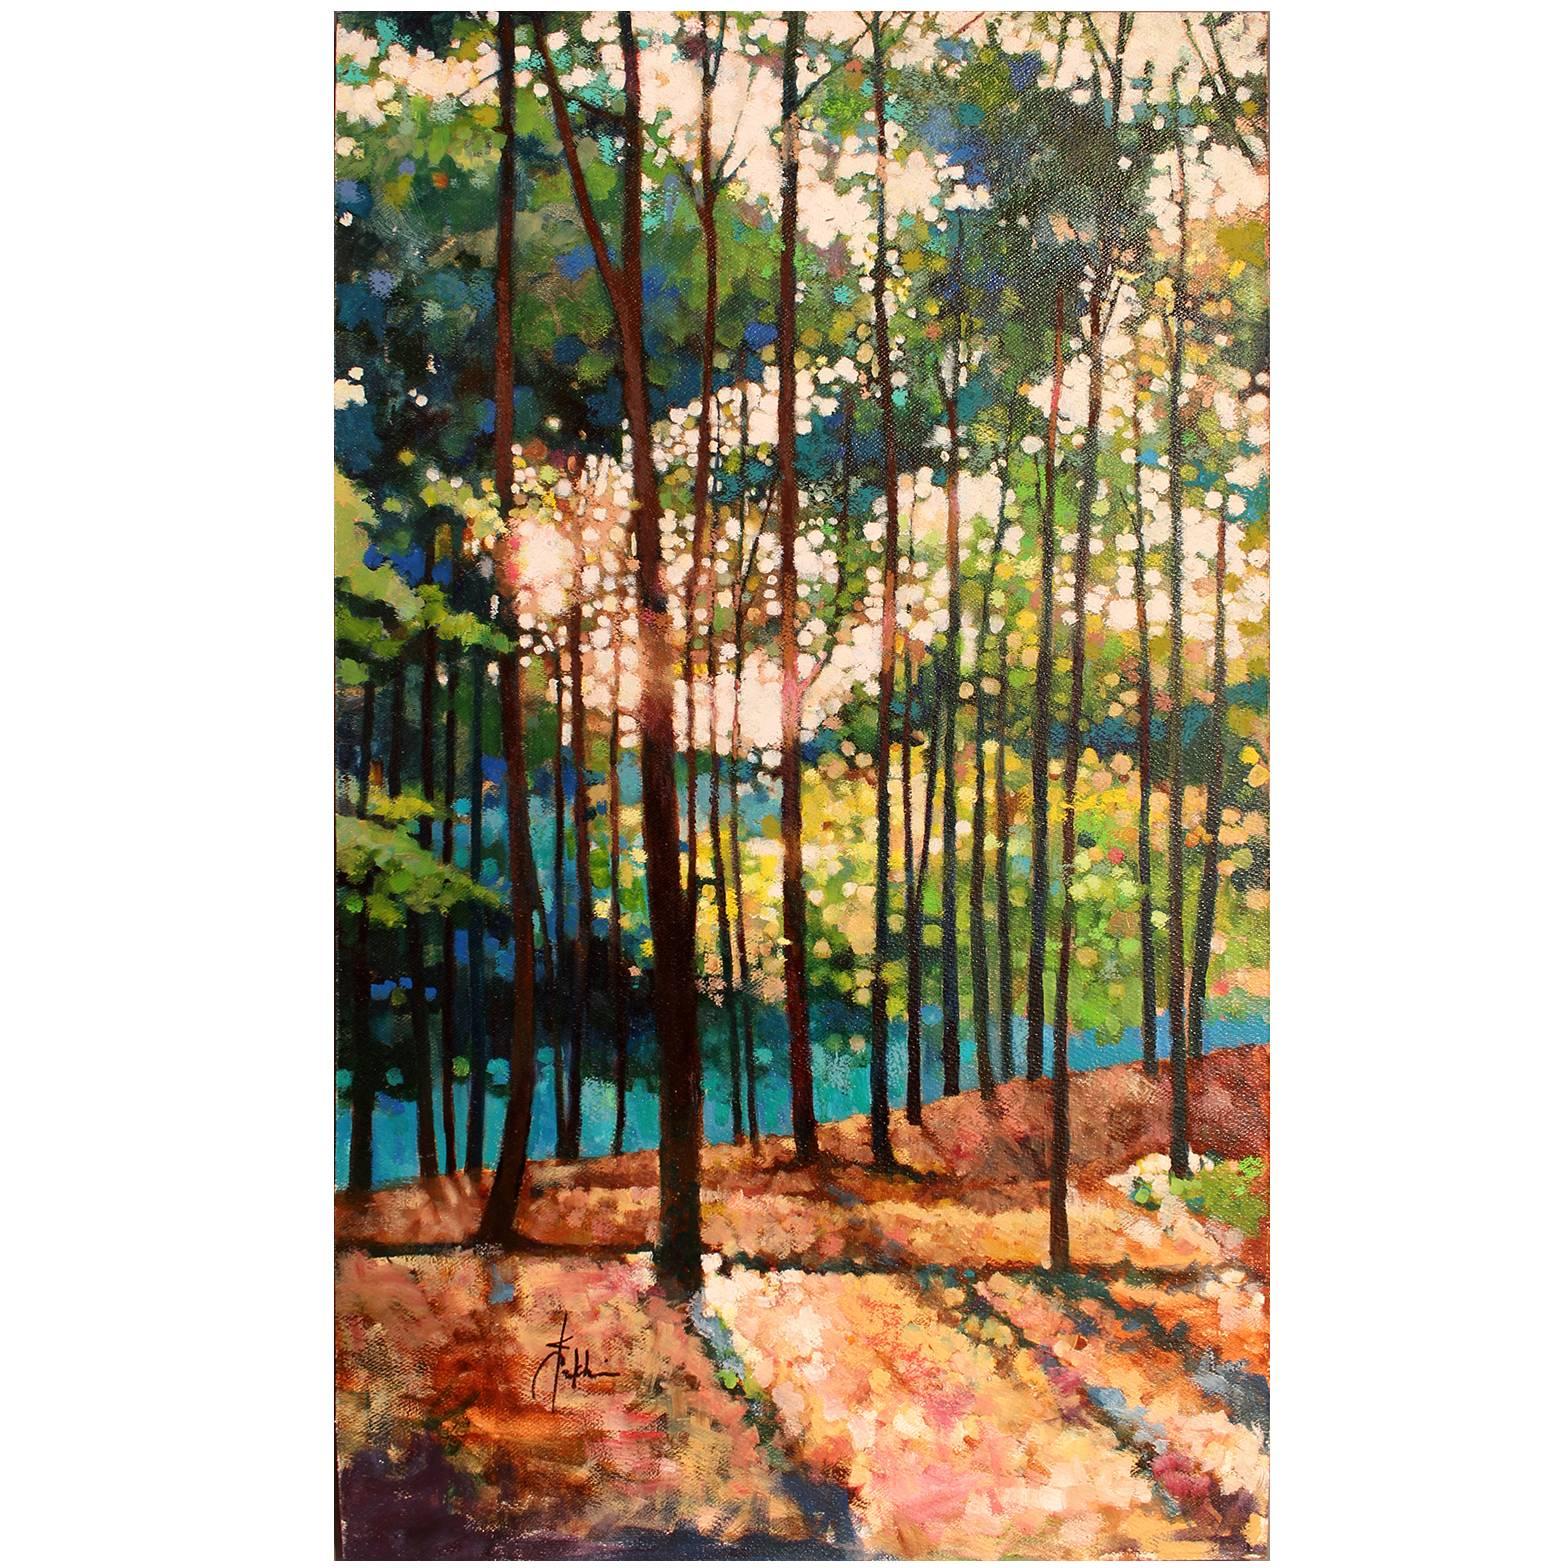 Original Oil and Oil Pastels Painting Landscape by Kevin Conklin "Poet's Walk 4"